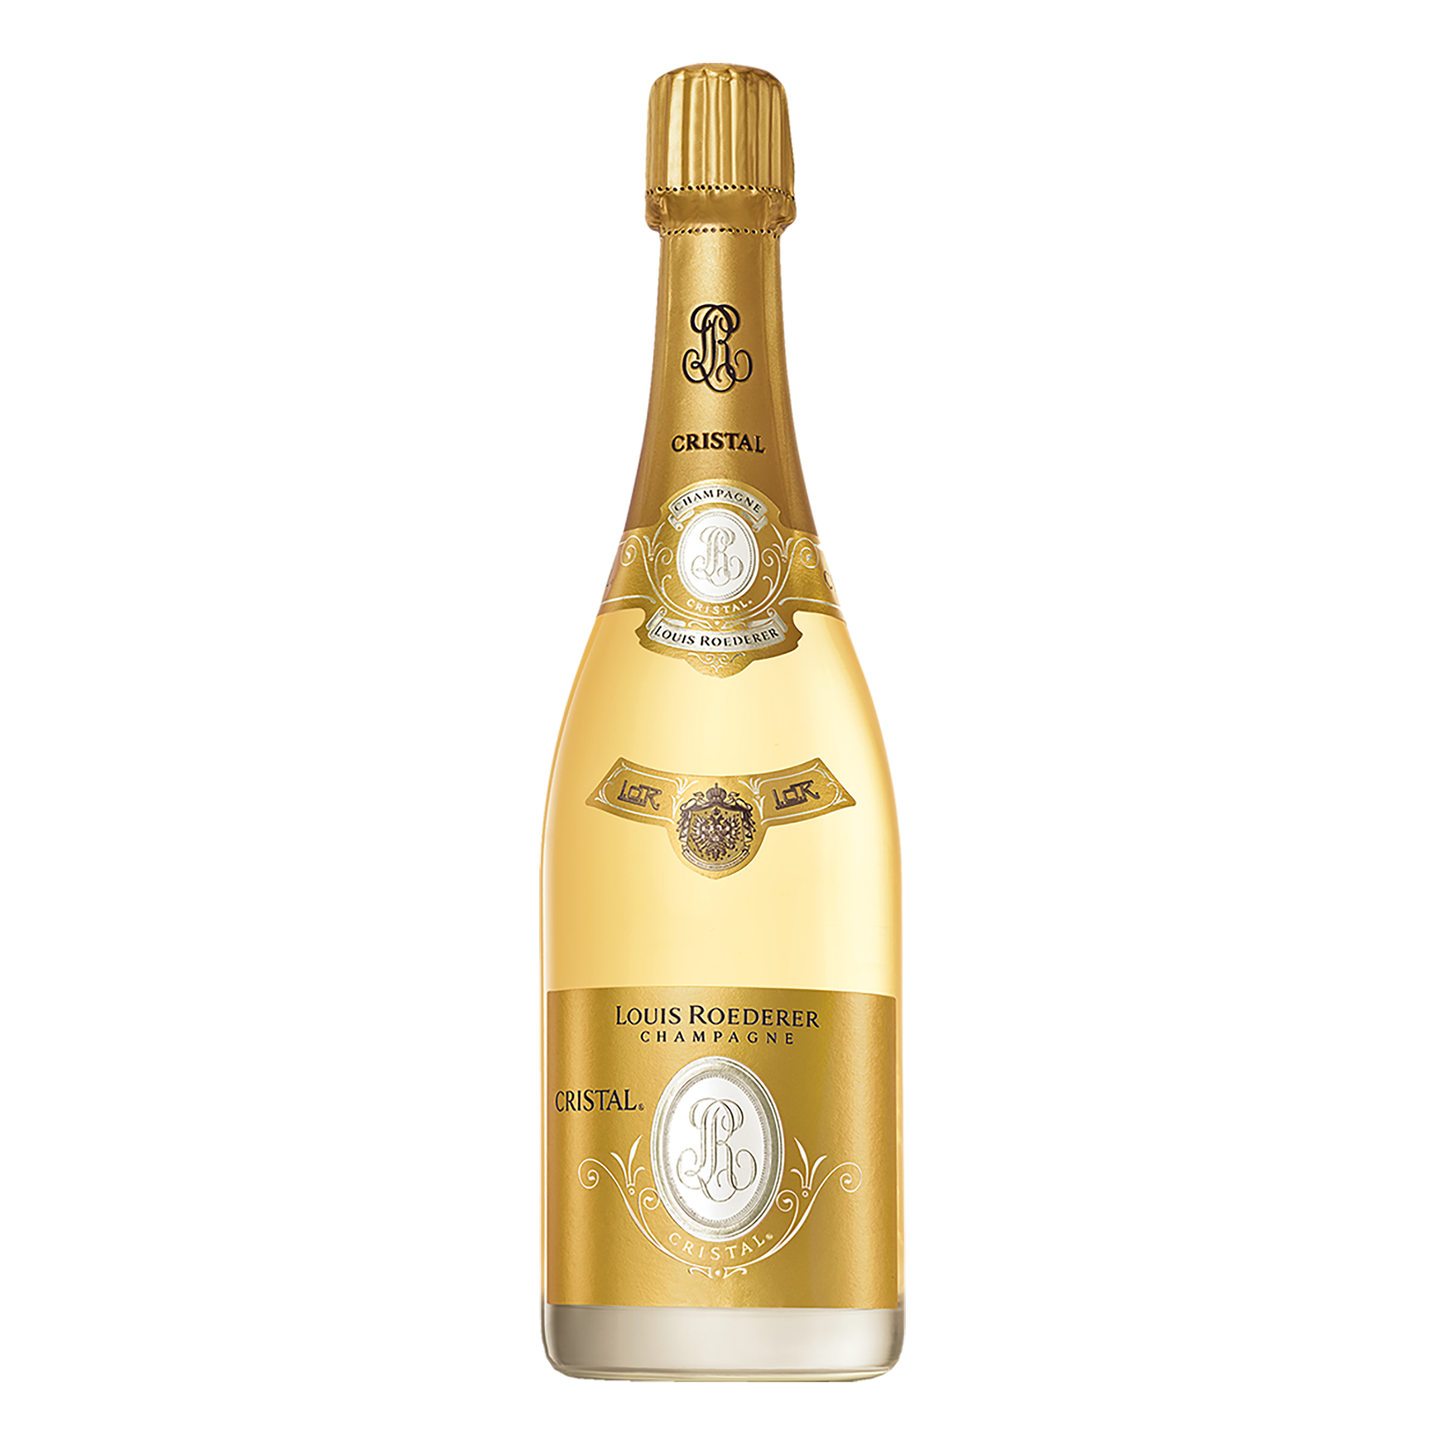 Louis Roederer Cristal Champagne 2014